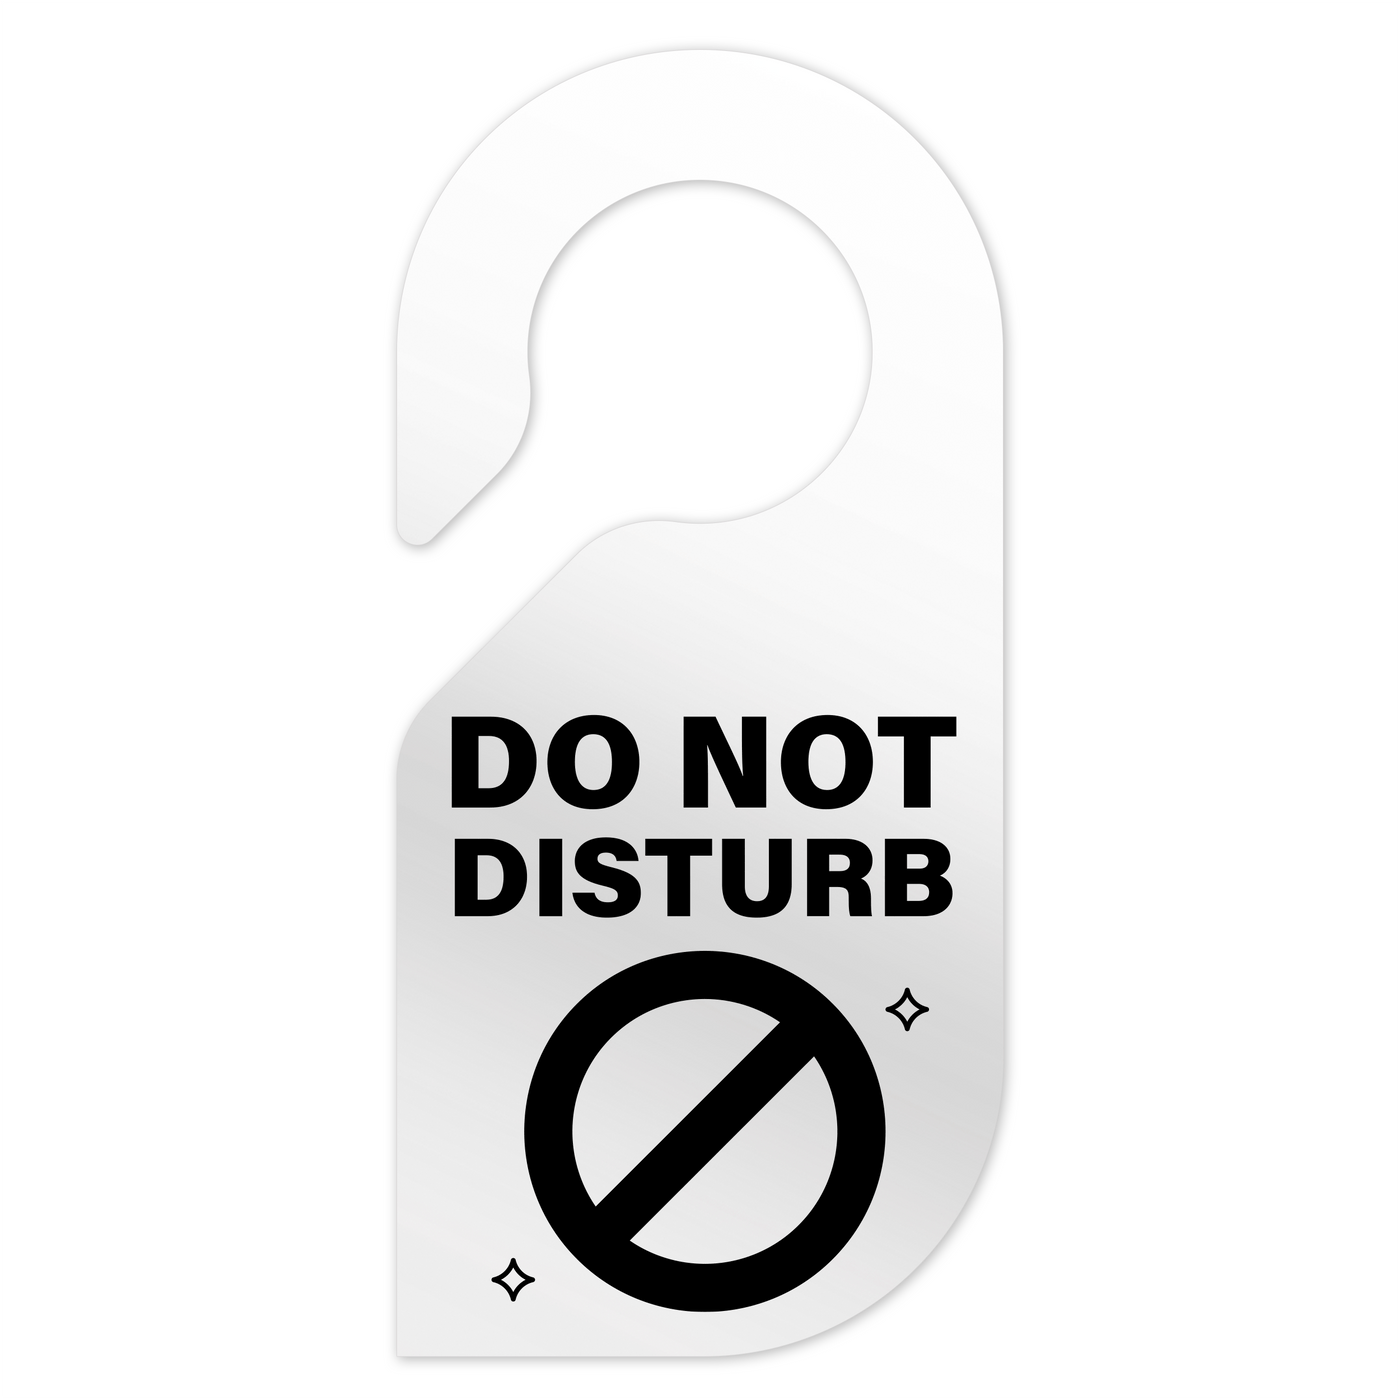 Door Signs - Don't Disturb Sign - Clear Acrylic